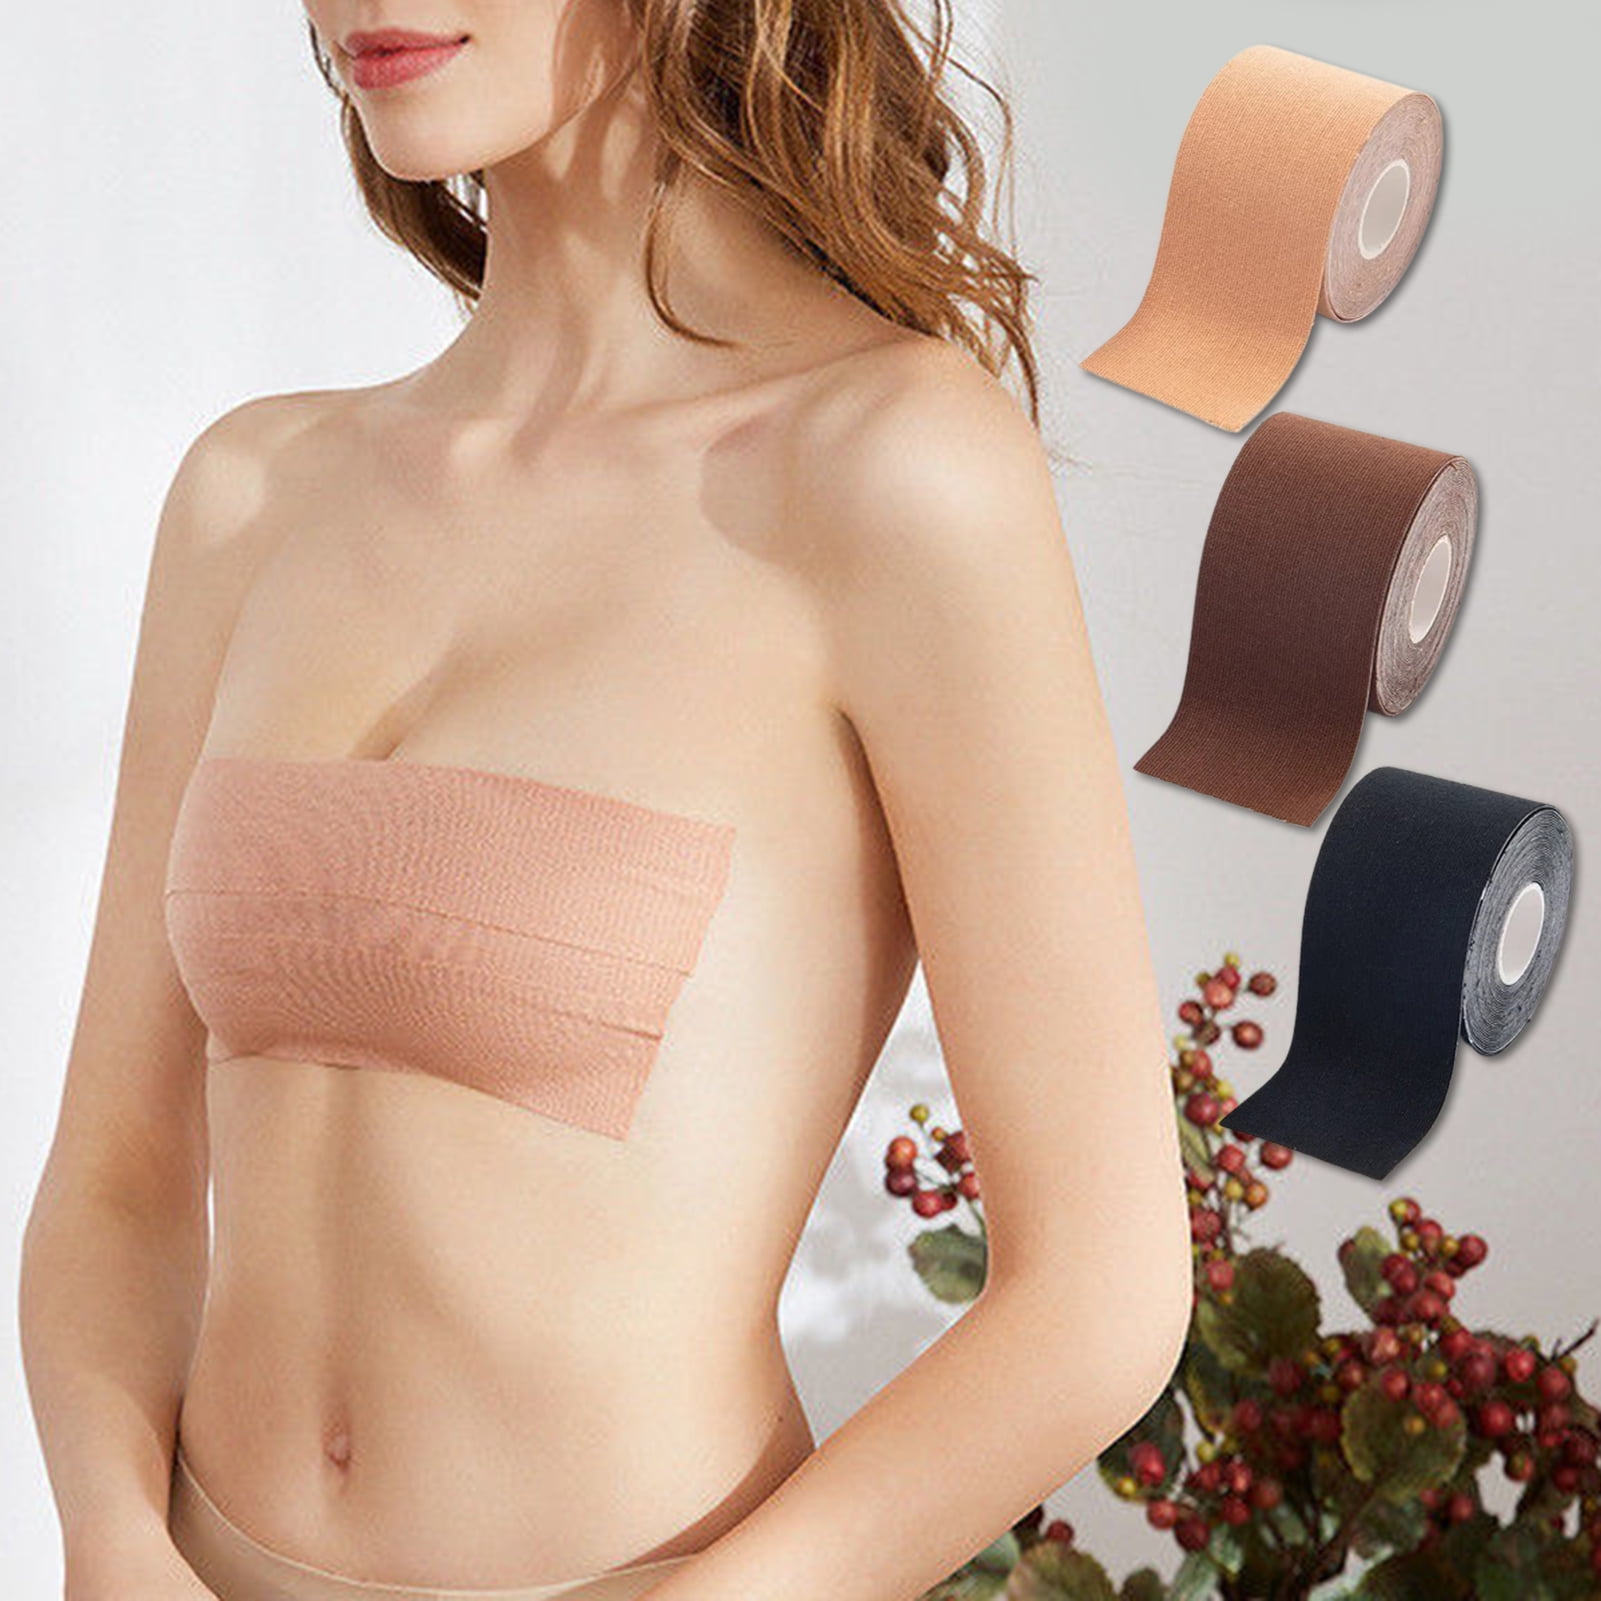 Breast Enhancement Care Patch for Women Breast - China Boob Body Tape, New  Breast Tape Transparent